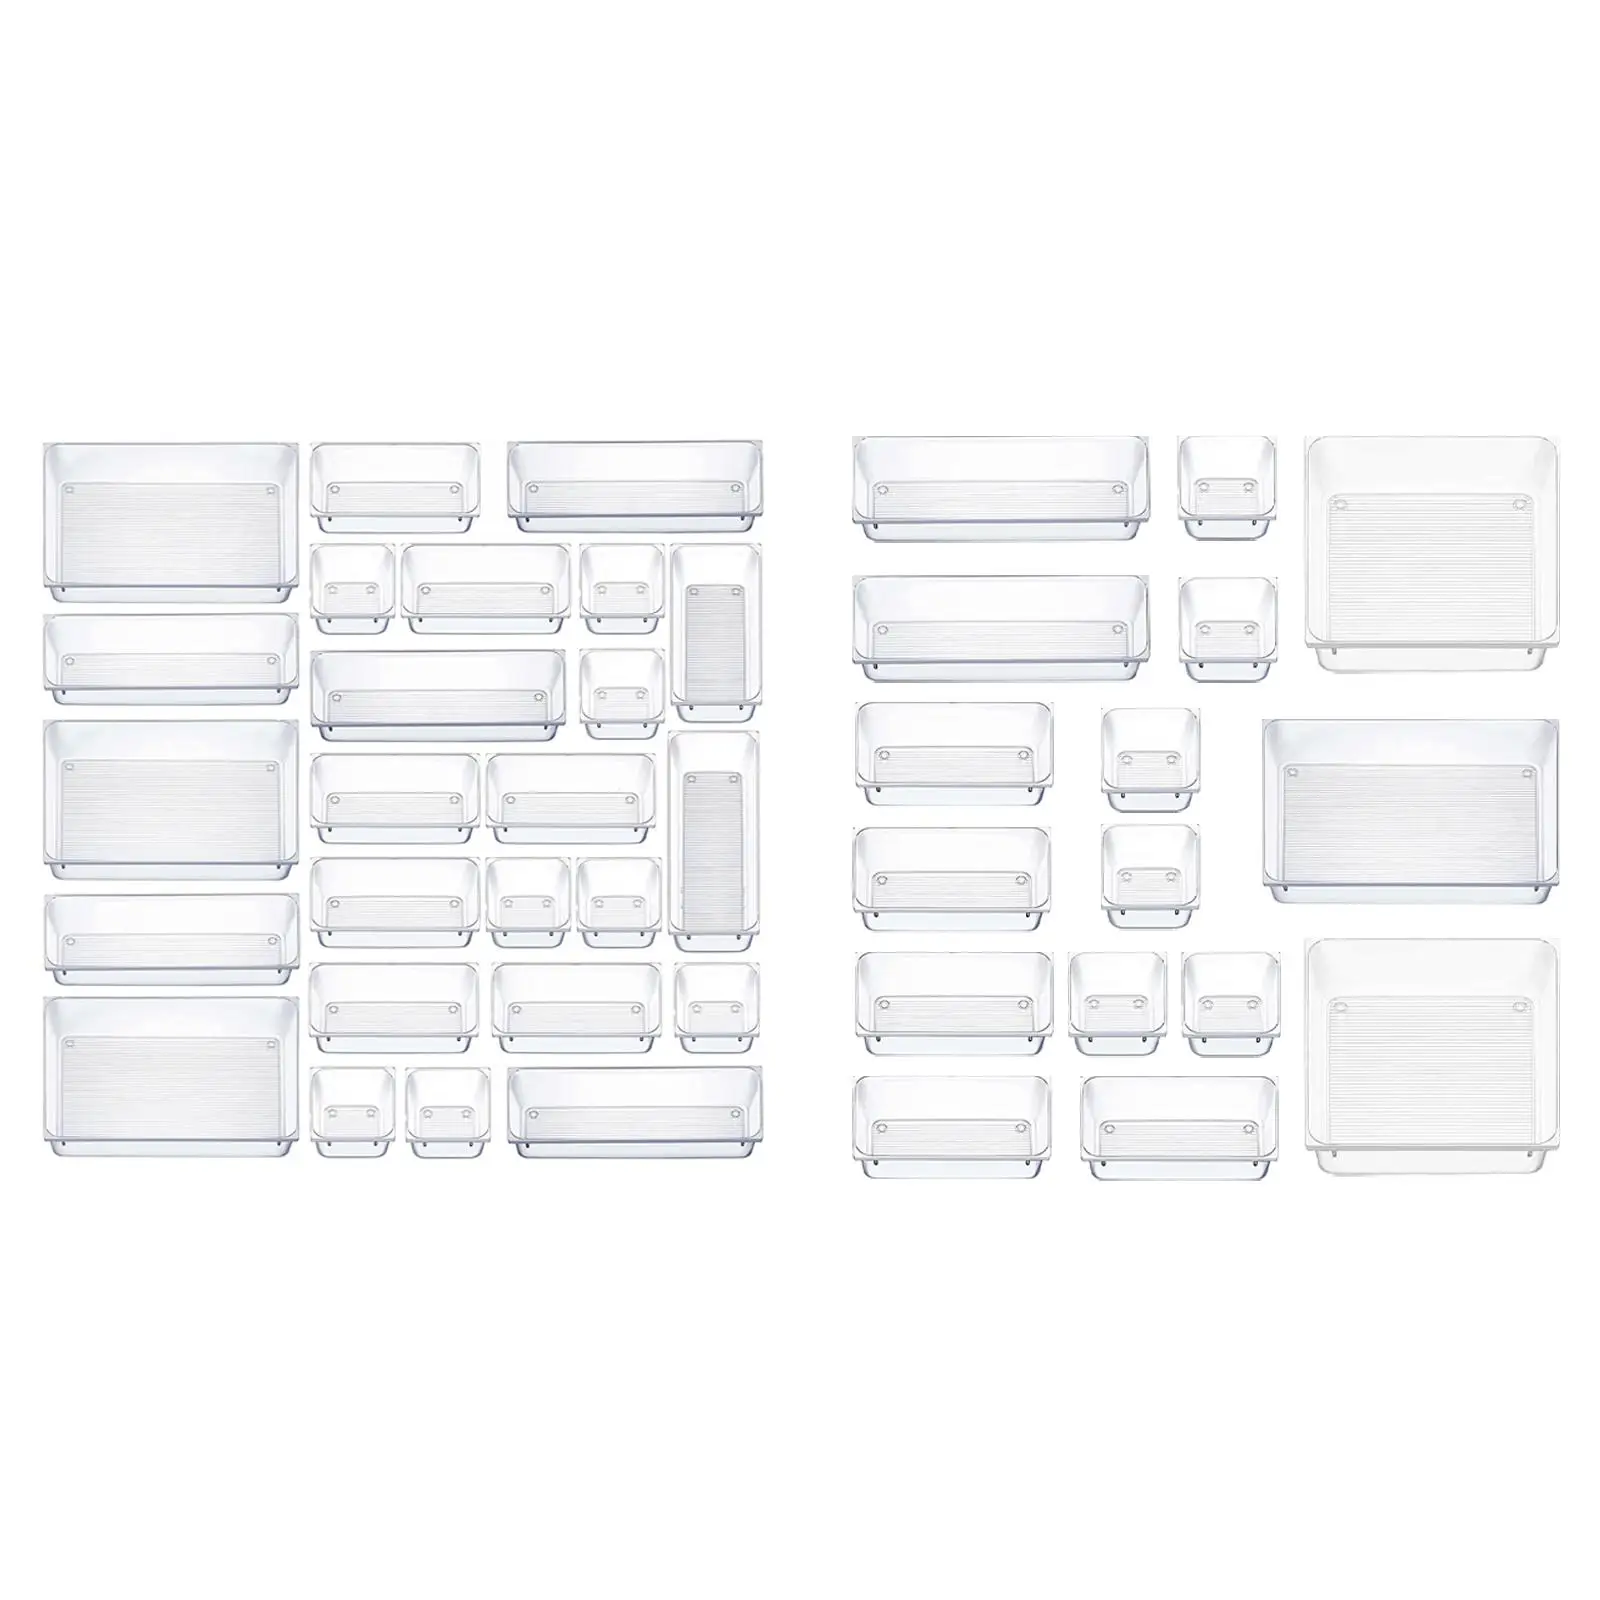 Transparent Desk Drawer Organizer with Non Slip Silicone Pads Divider Container Drawer Organizers Set for Bathroom